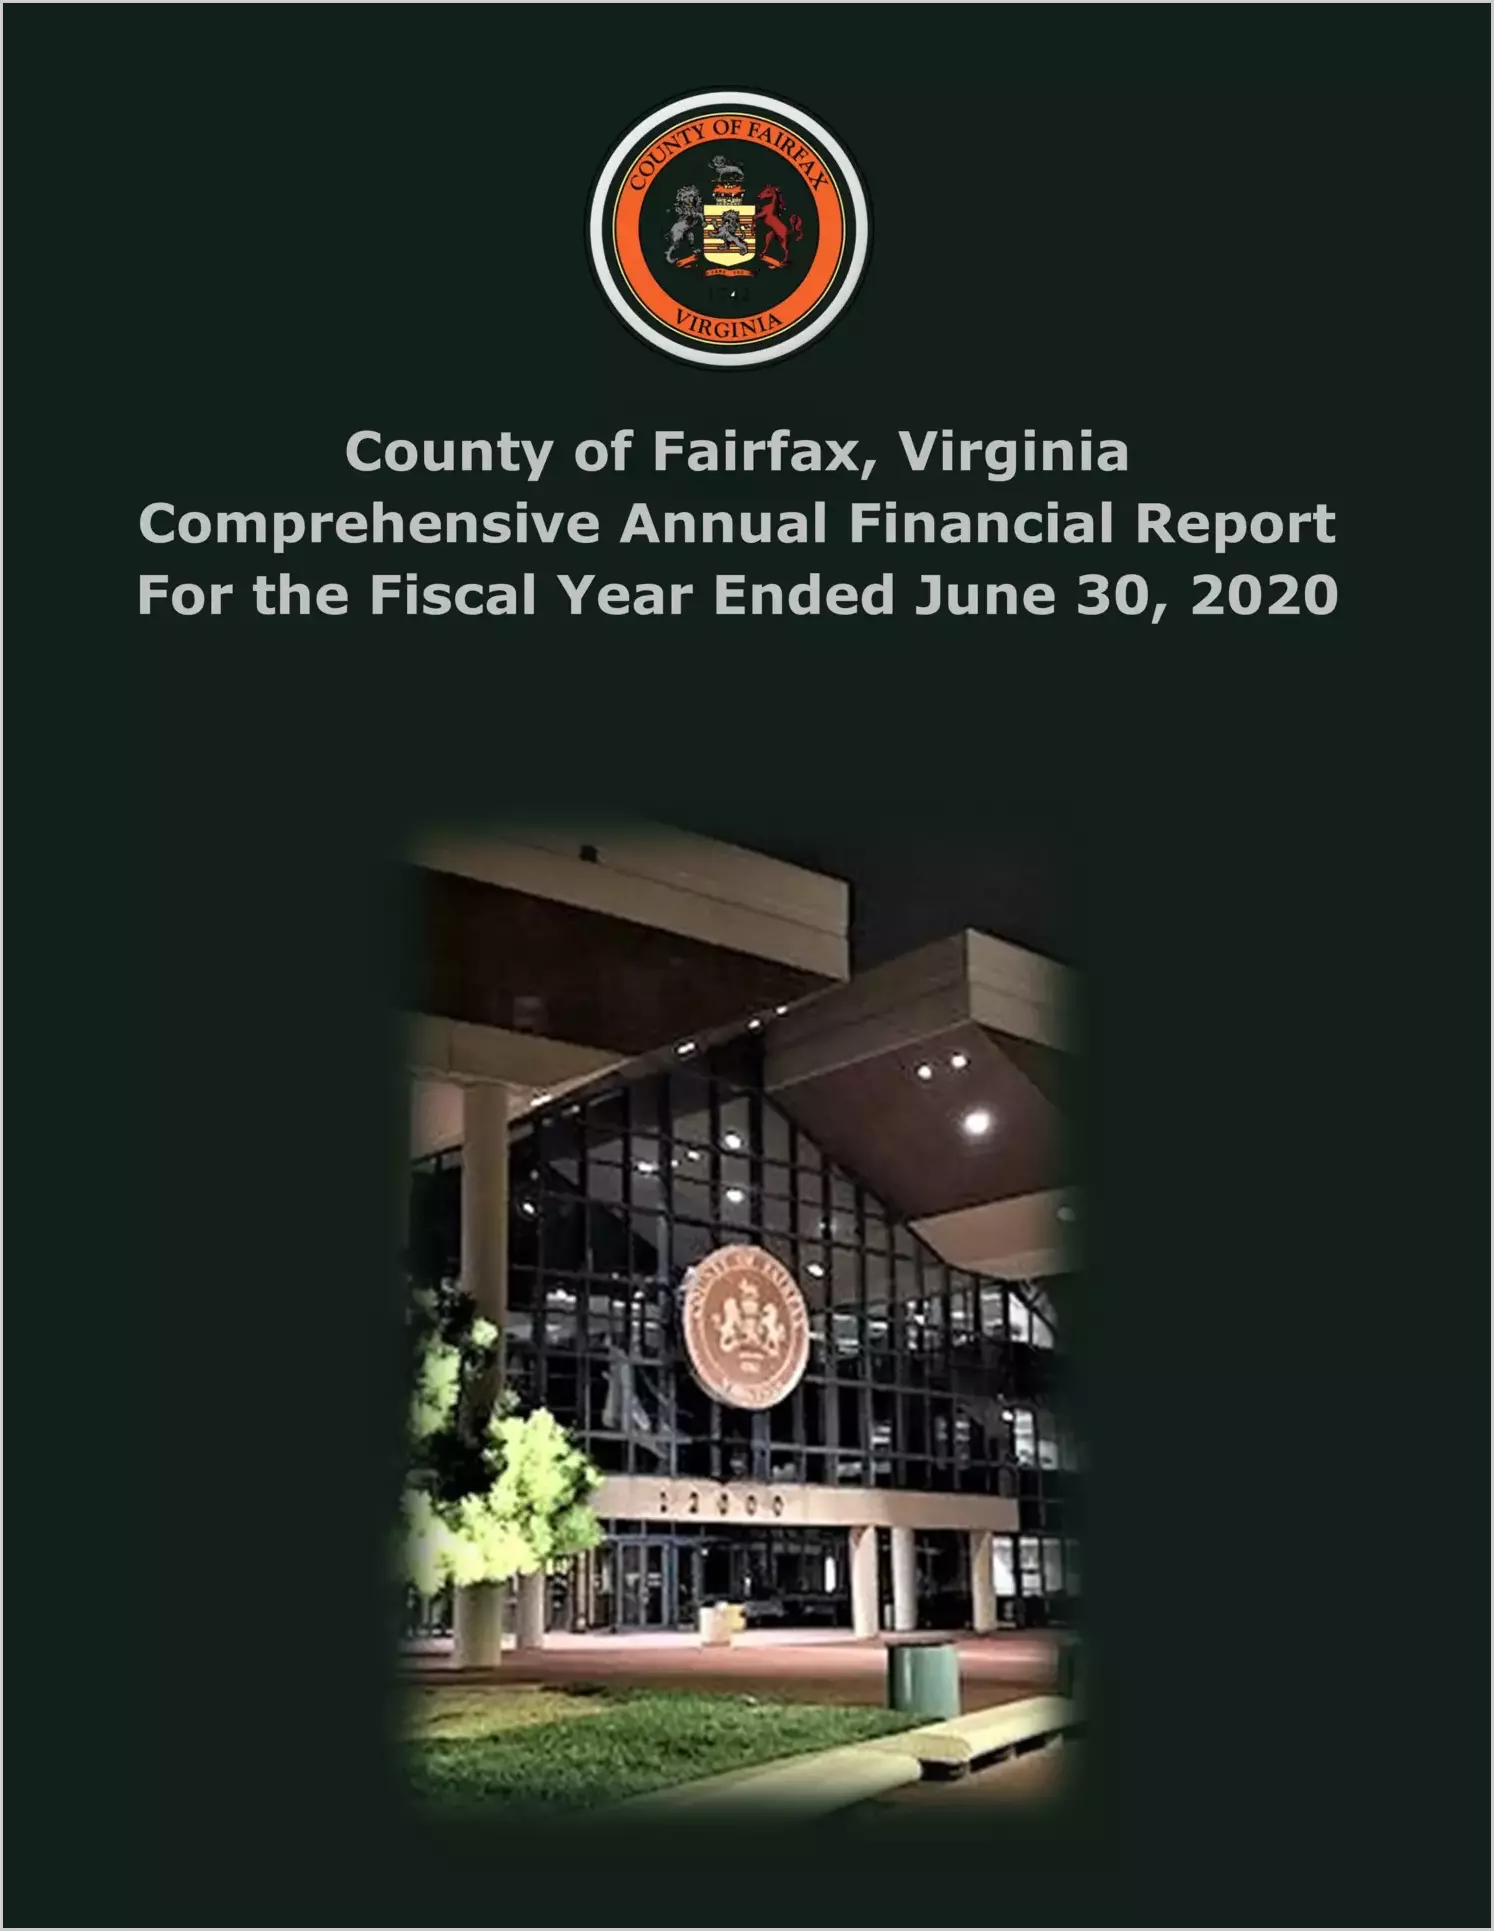 2020 Annual Financial Report for County of Fairfax